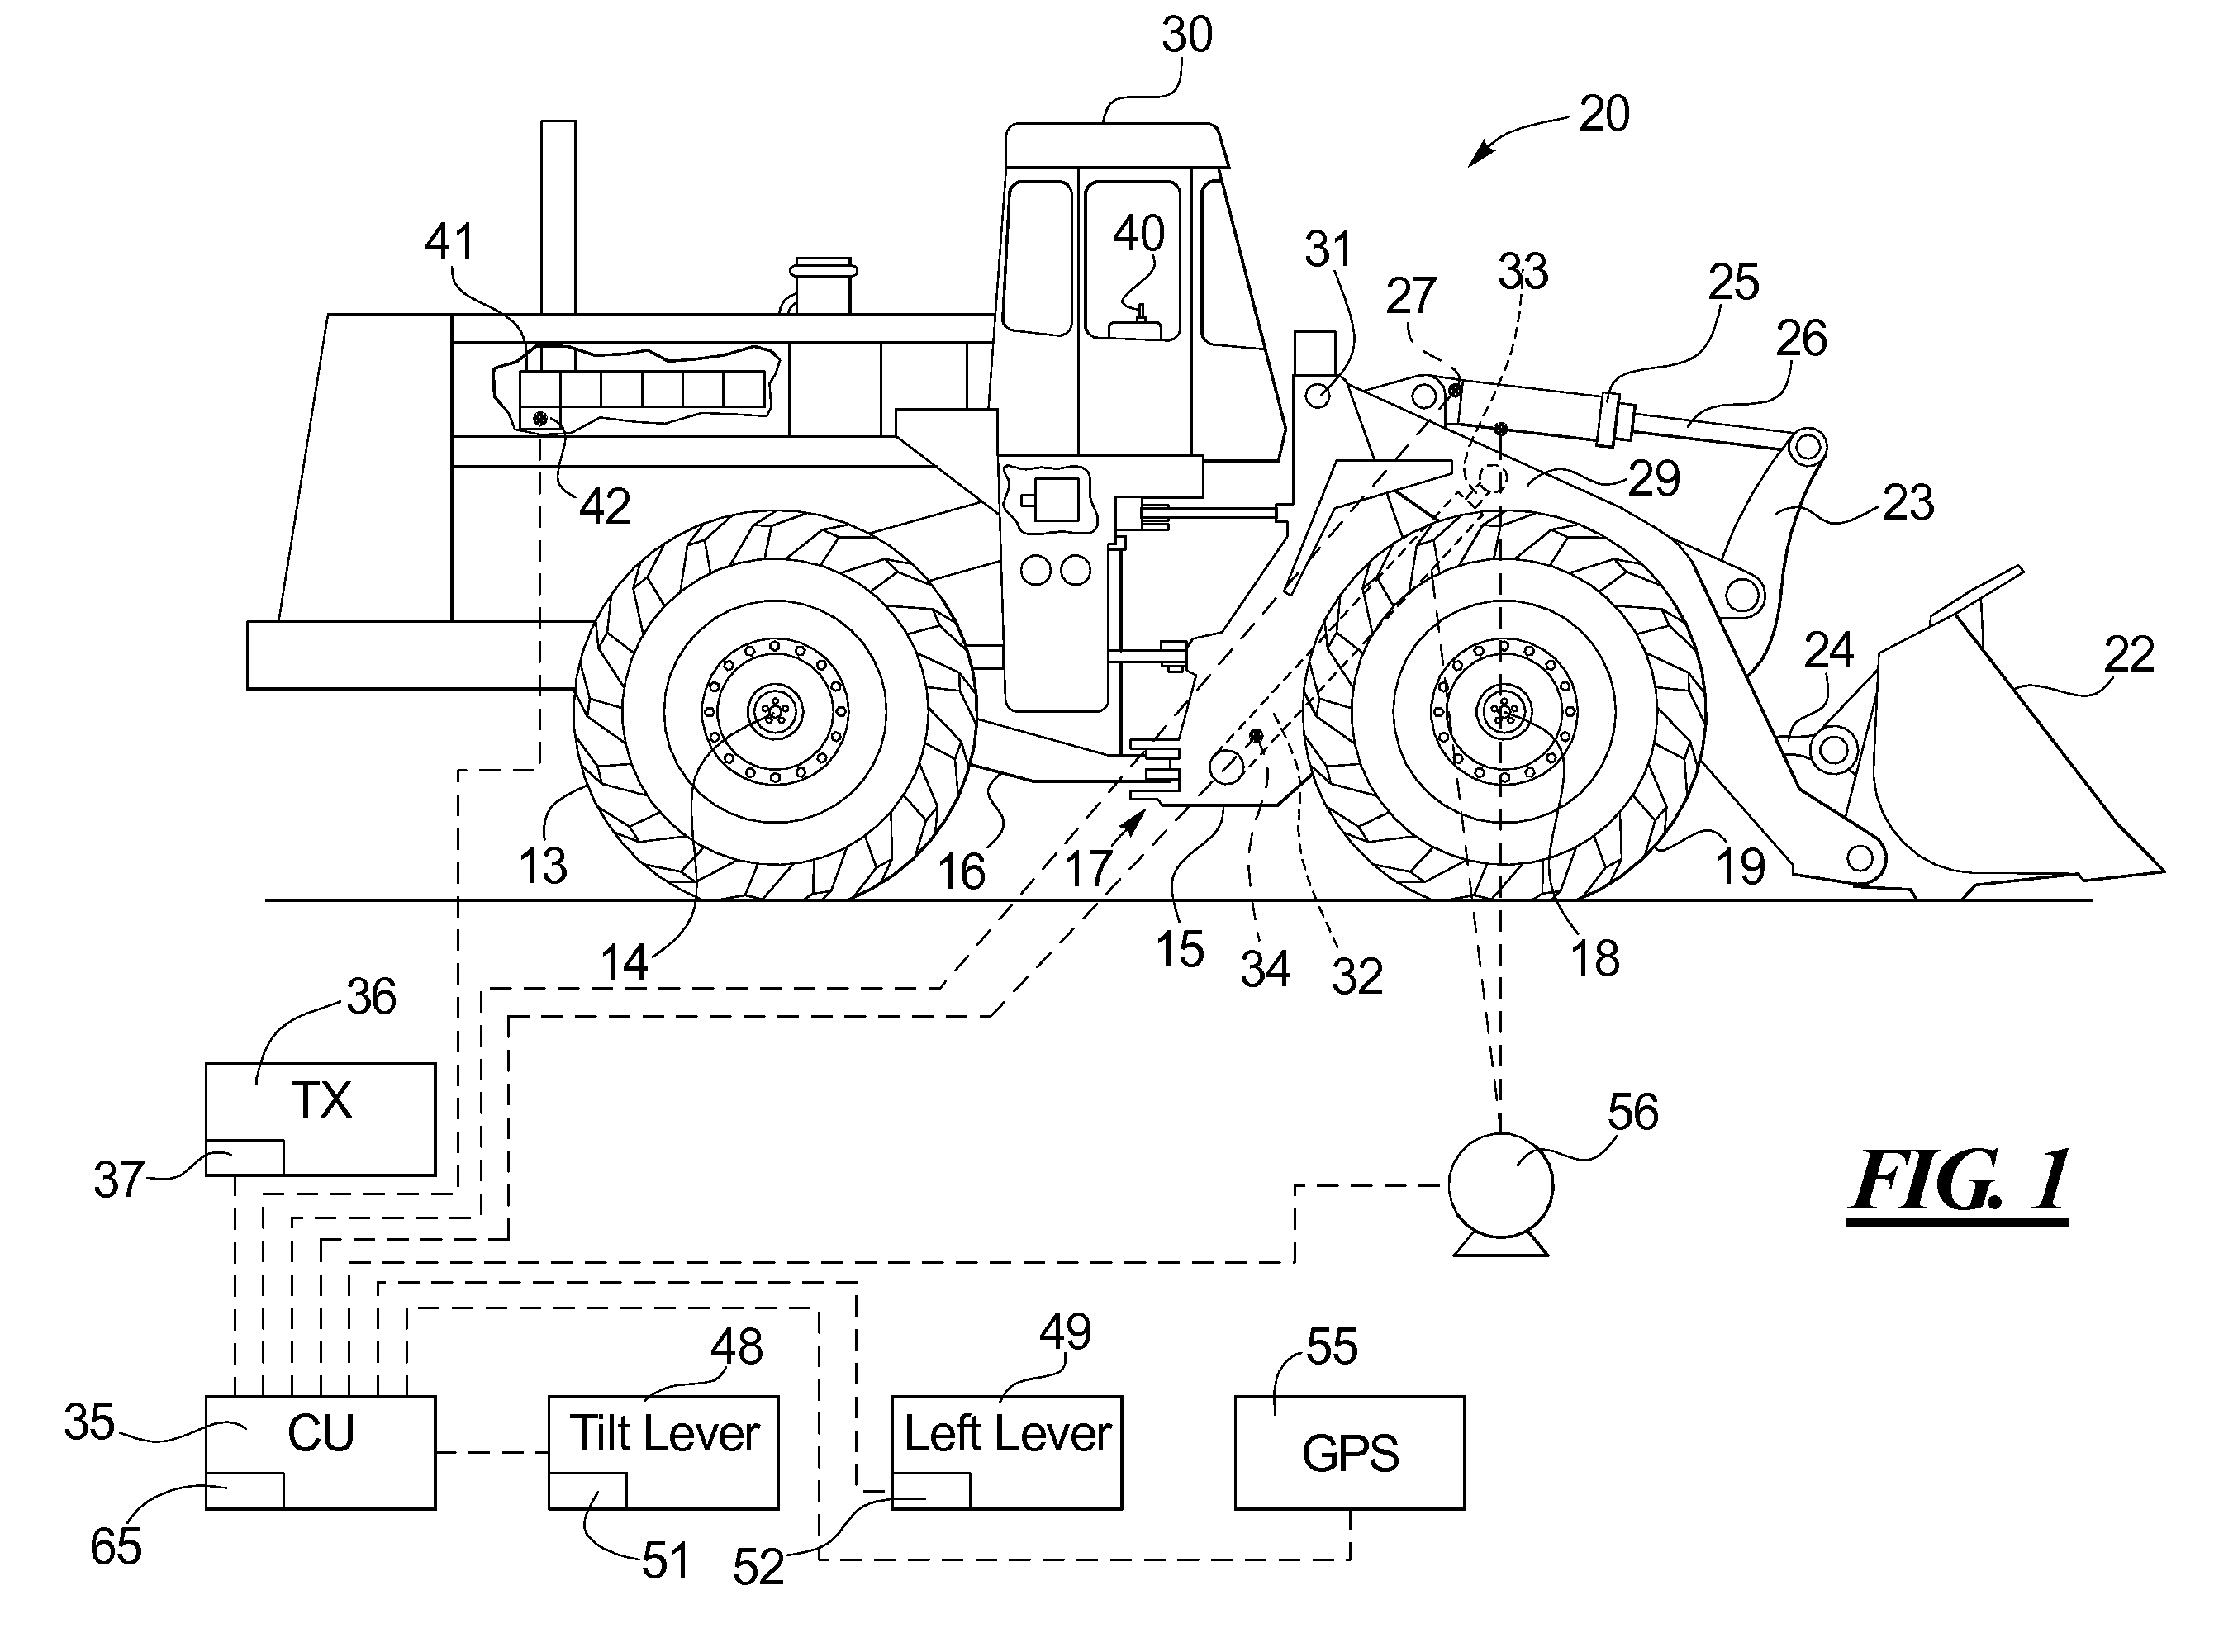 Equipment Performance Monitoring System and Method